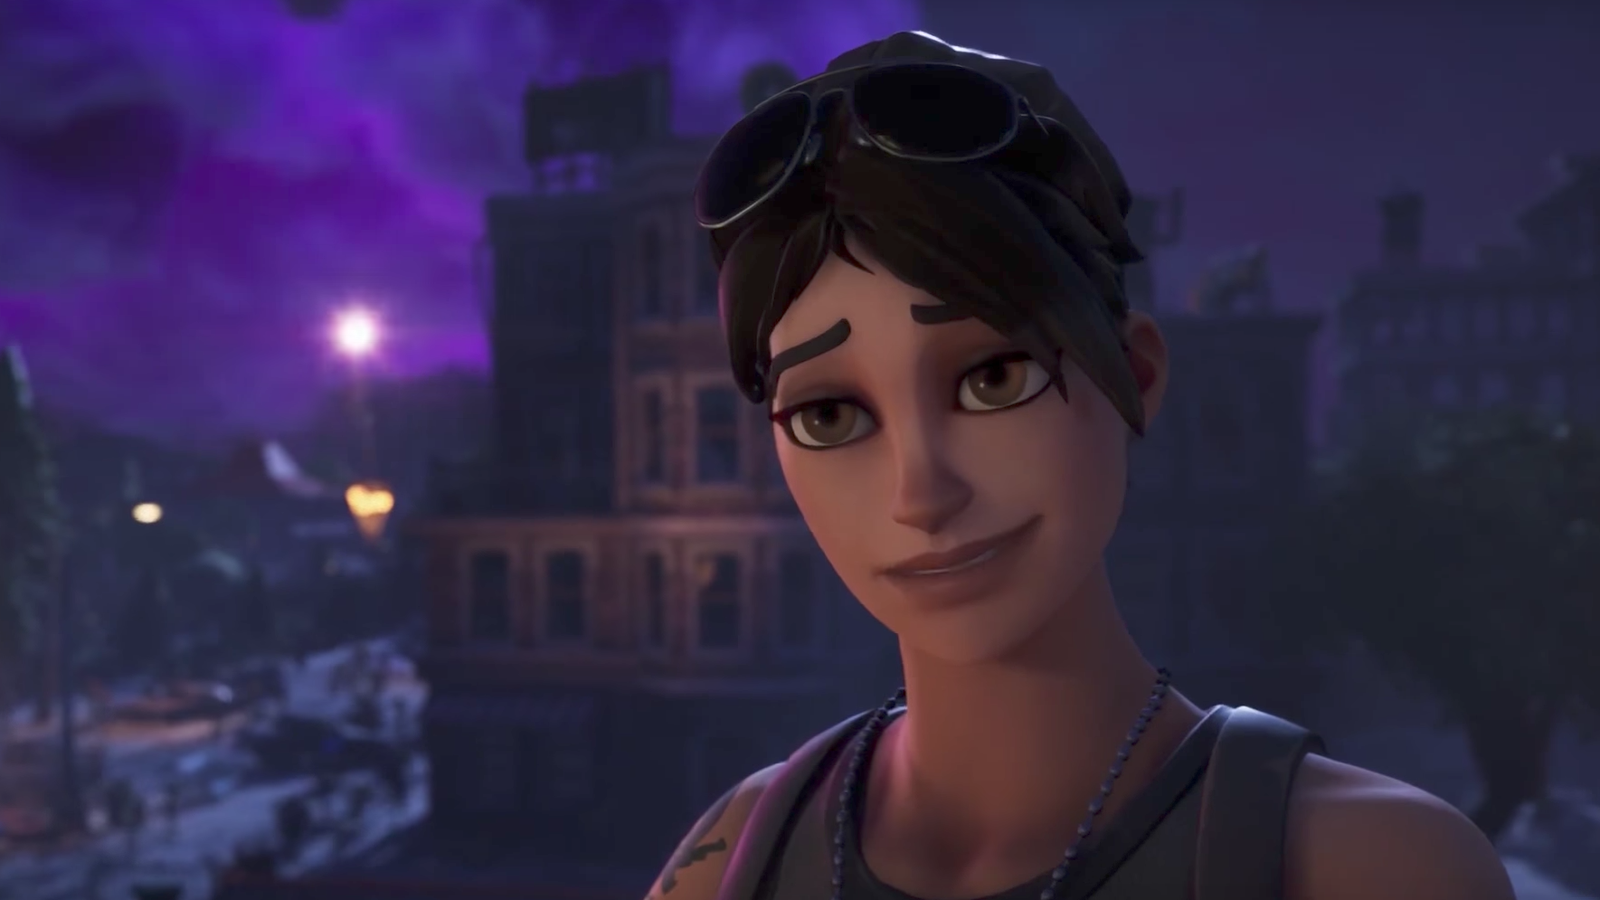 Epic Is Suing Two Alleged Fortnite Cheaters - 1600 x 900 png 1161kB